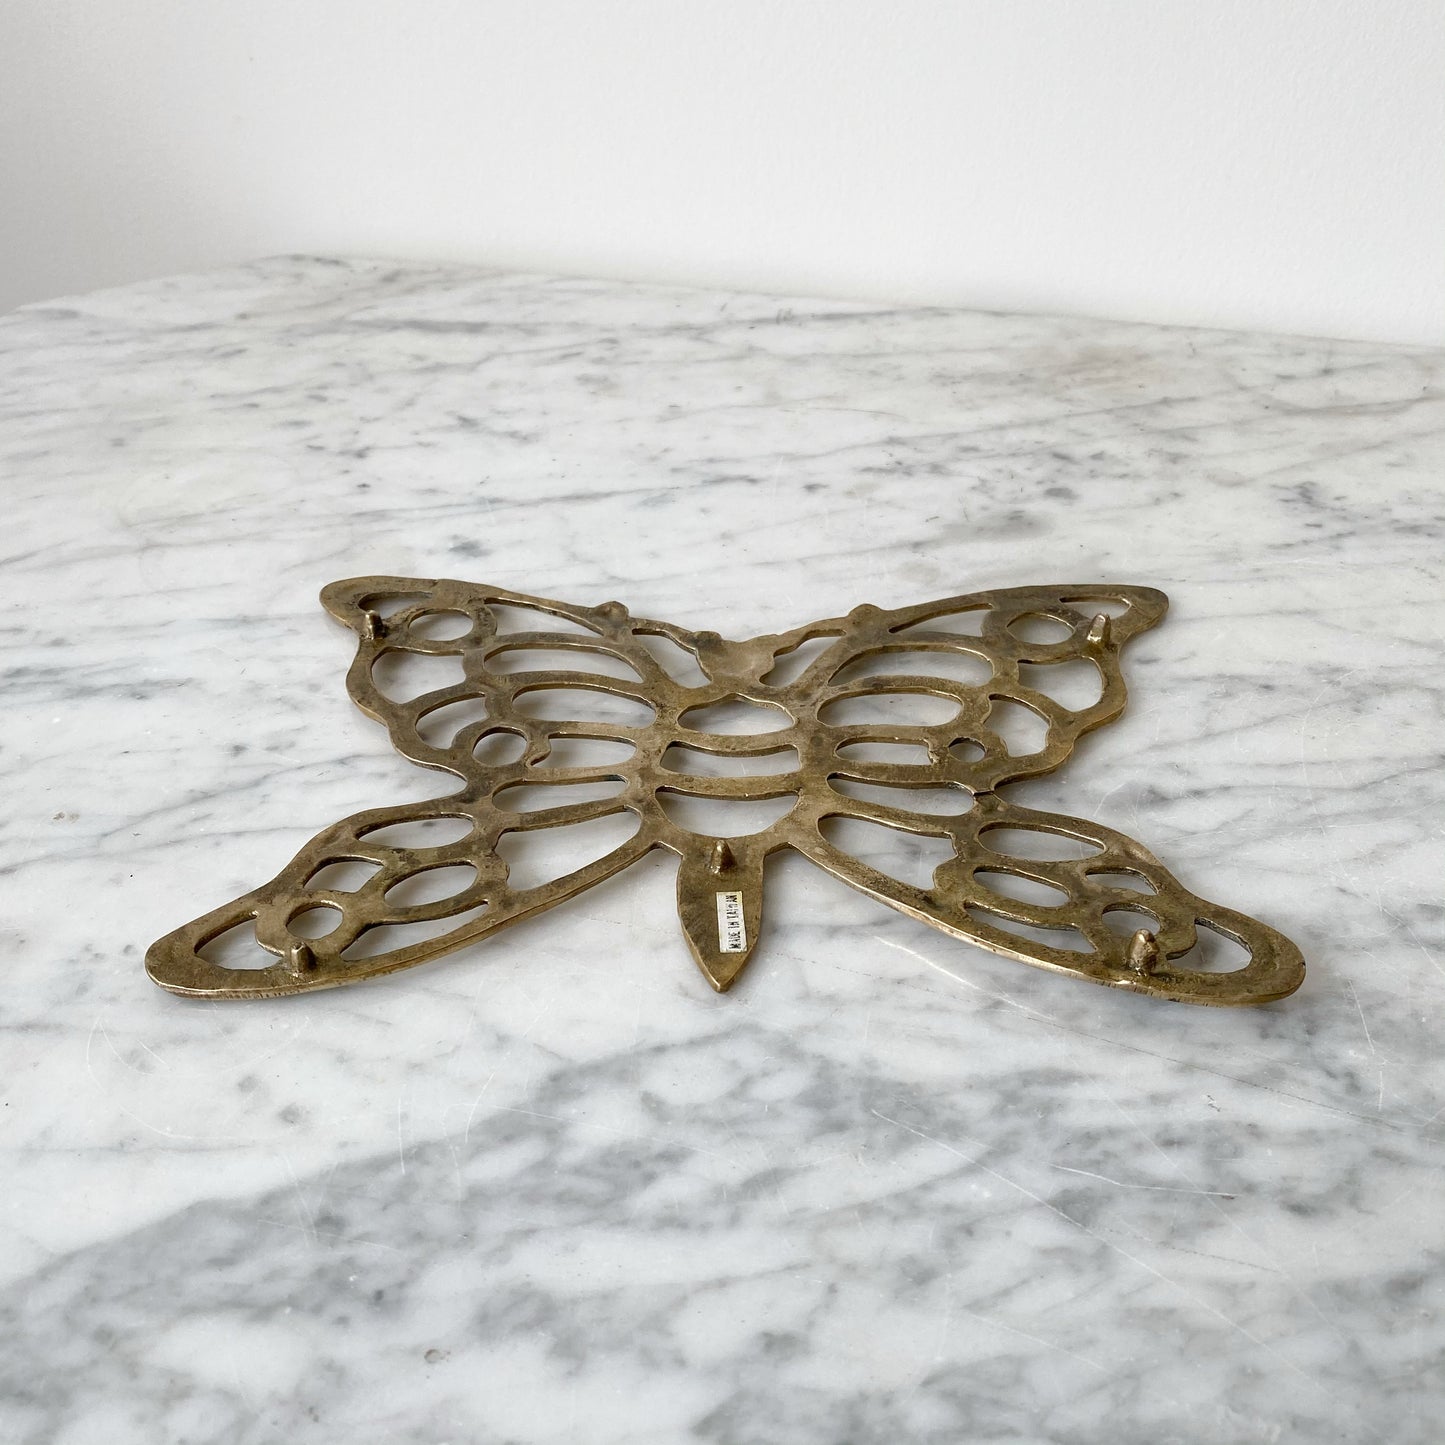 Vintage Solid Brass Butterfly Trivet / Wall Decor